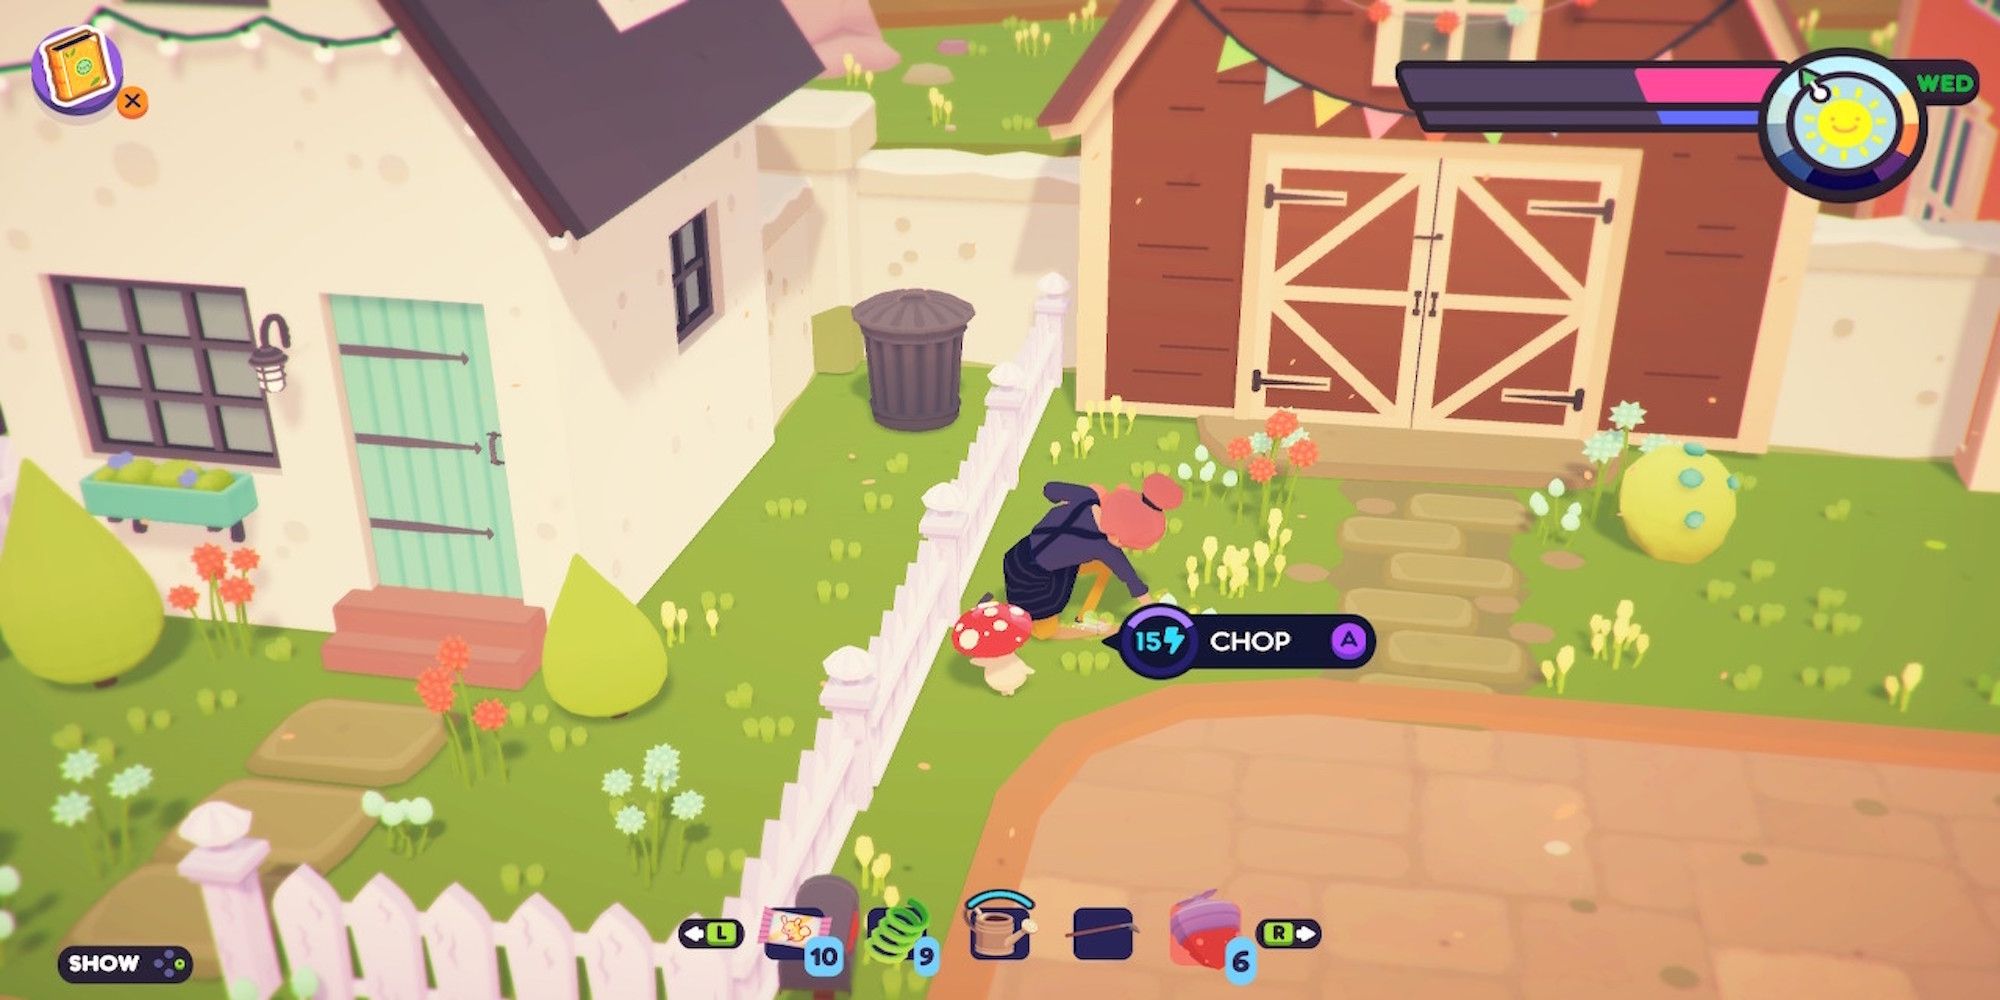 Farming for resources in Ooblets